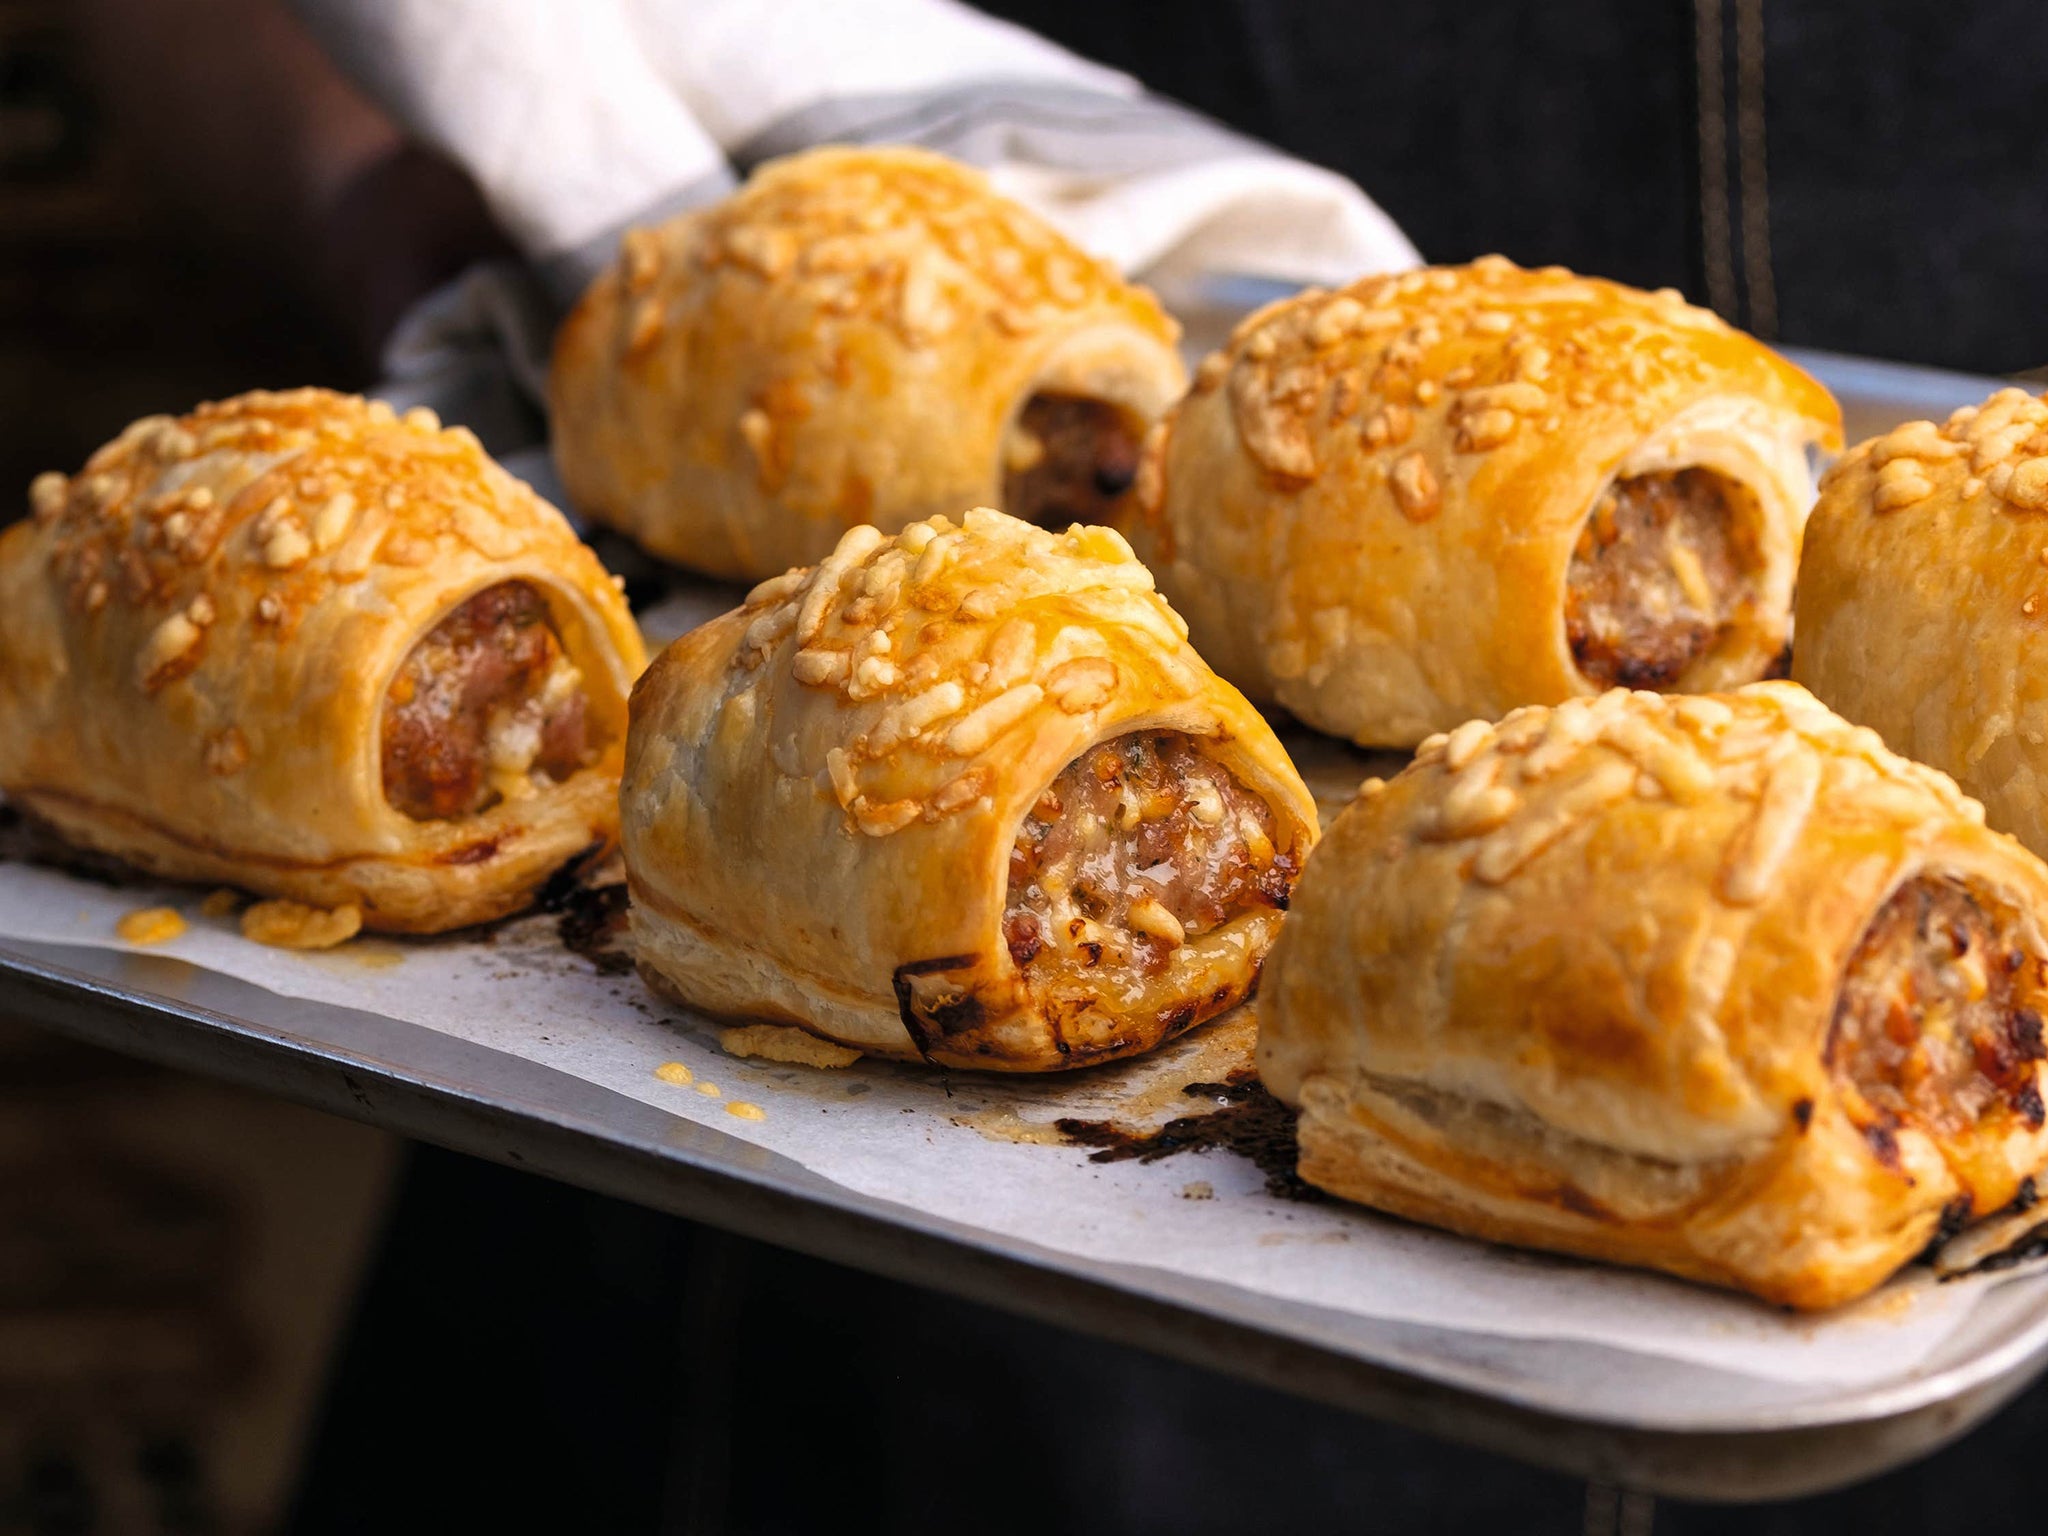 Warm from the oven, these quick and easy sausage rolls make a great lunch or snack